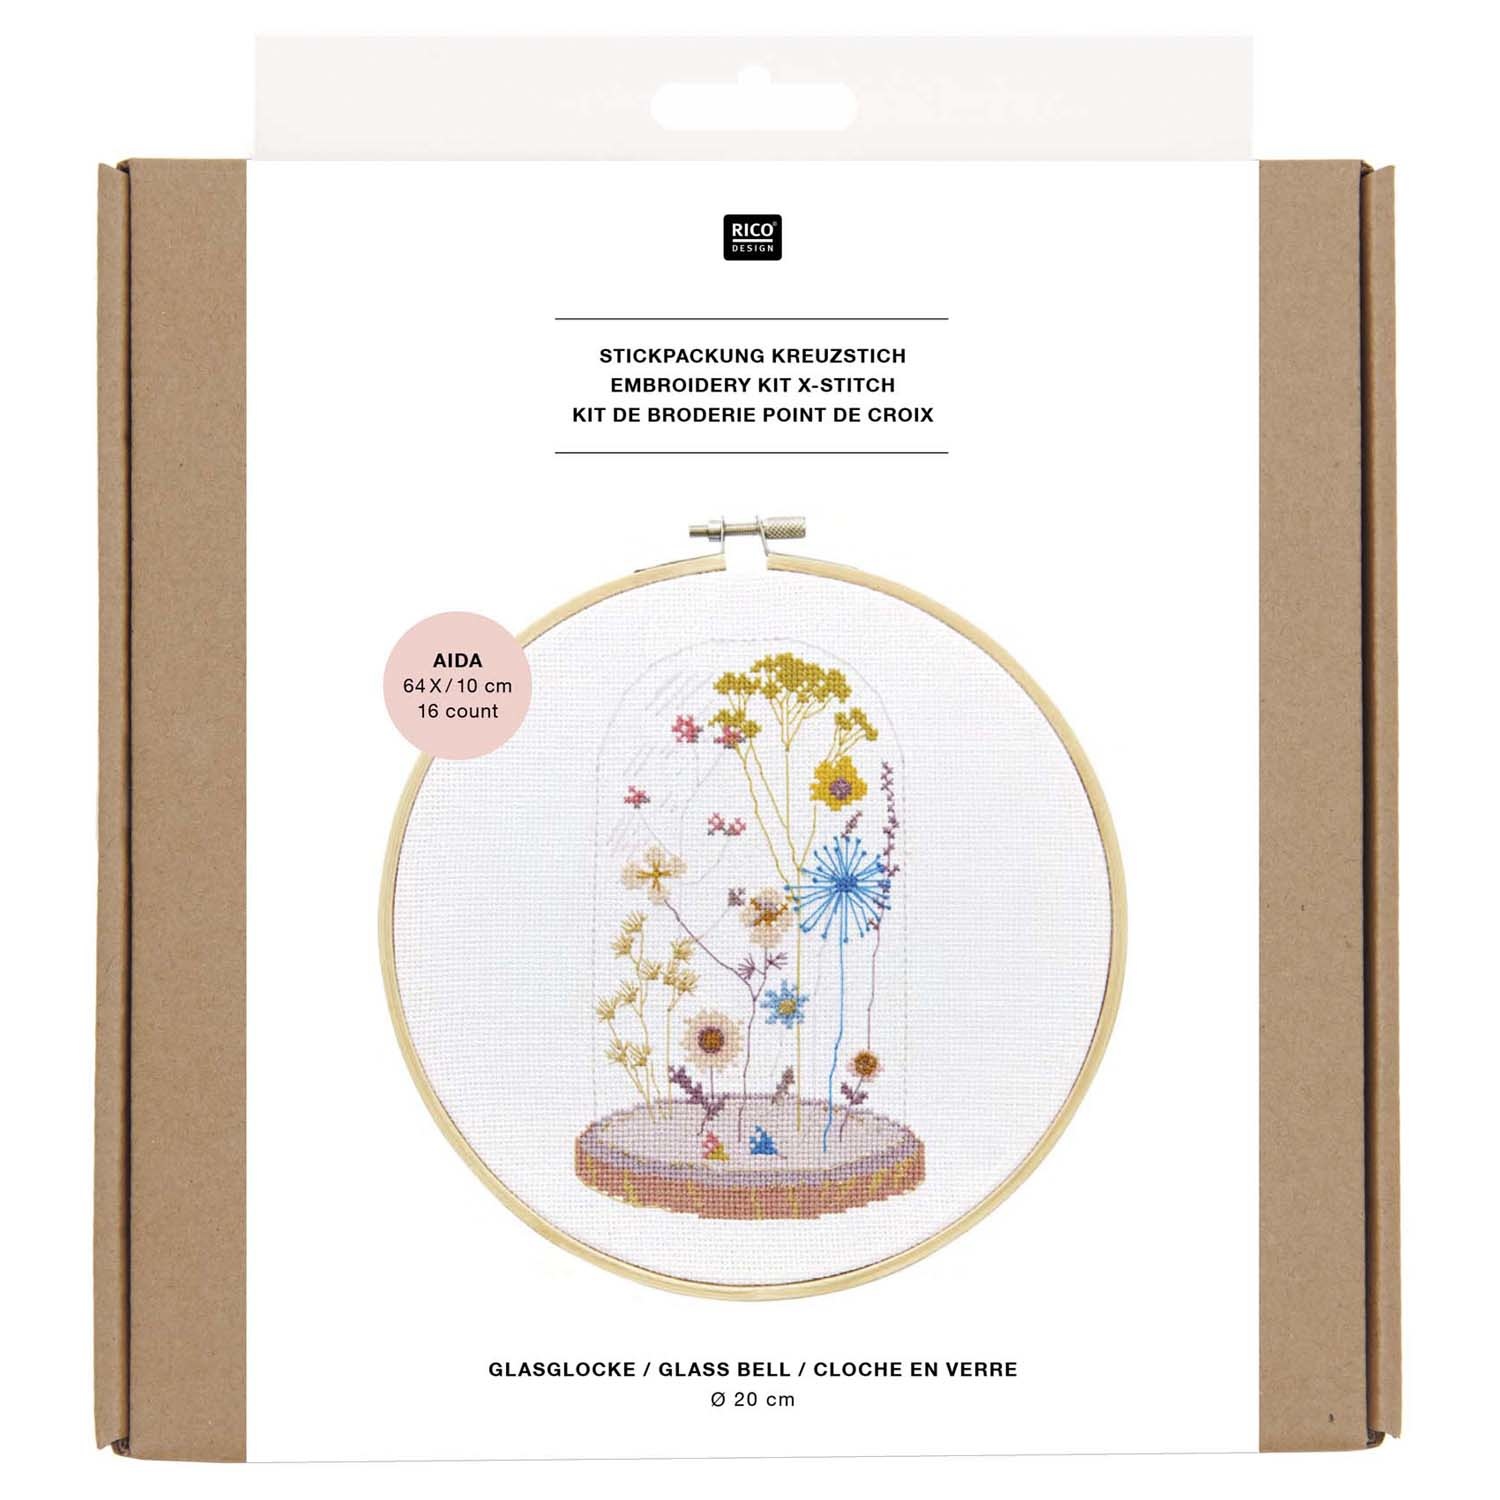 Rico NAY Embroidery kit transformation glass bell, picture Ø 20 cm, counted cross stitch